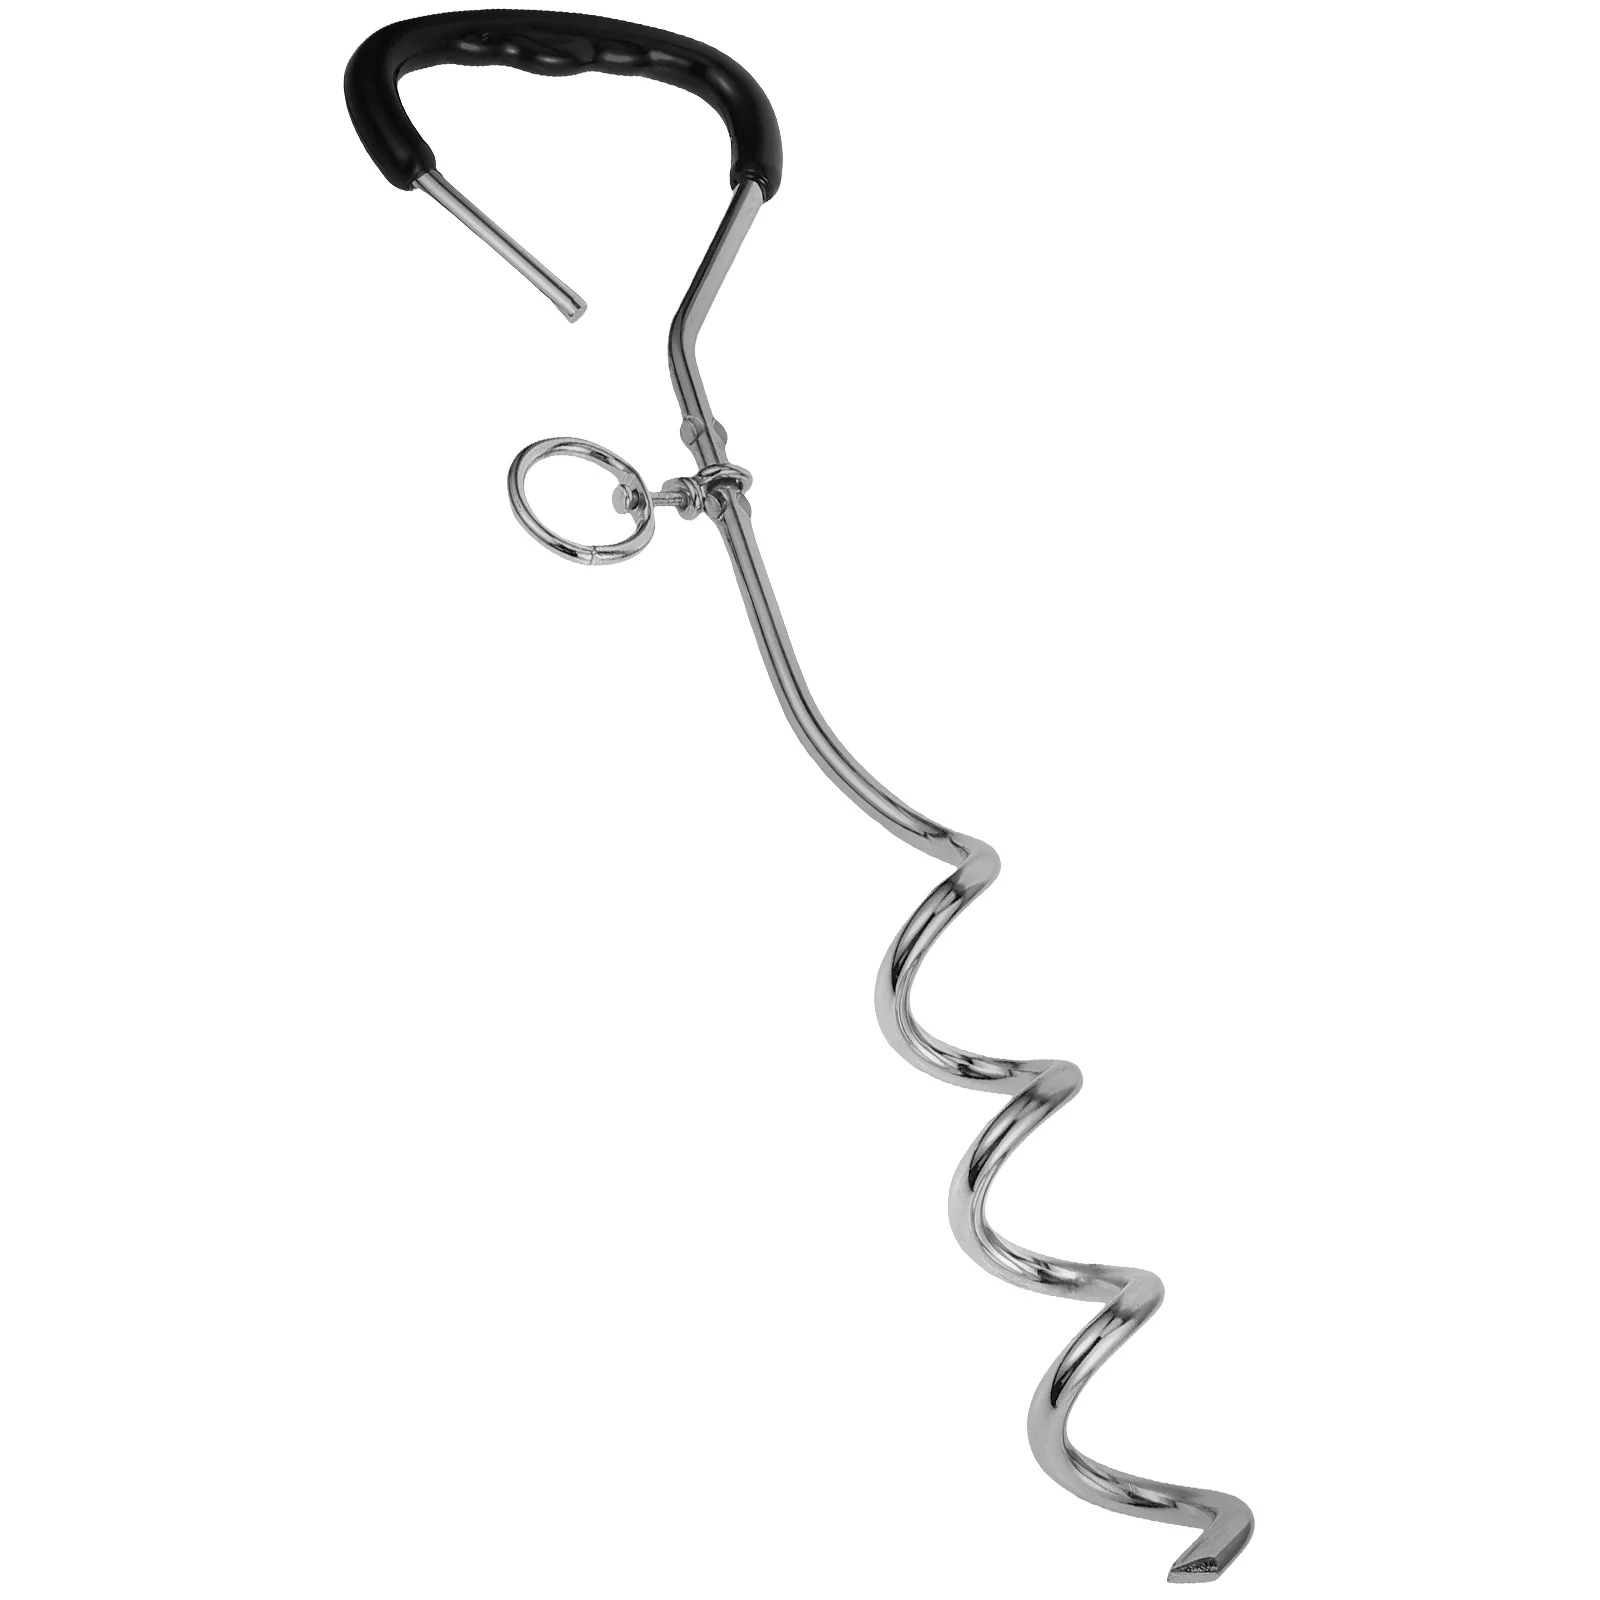 

Dog Tie Stake Ground Stakes Leash Tethered Spiral Anchor Iron Large Dogs Metal Yard Heavy Duty